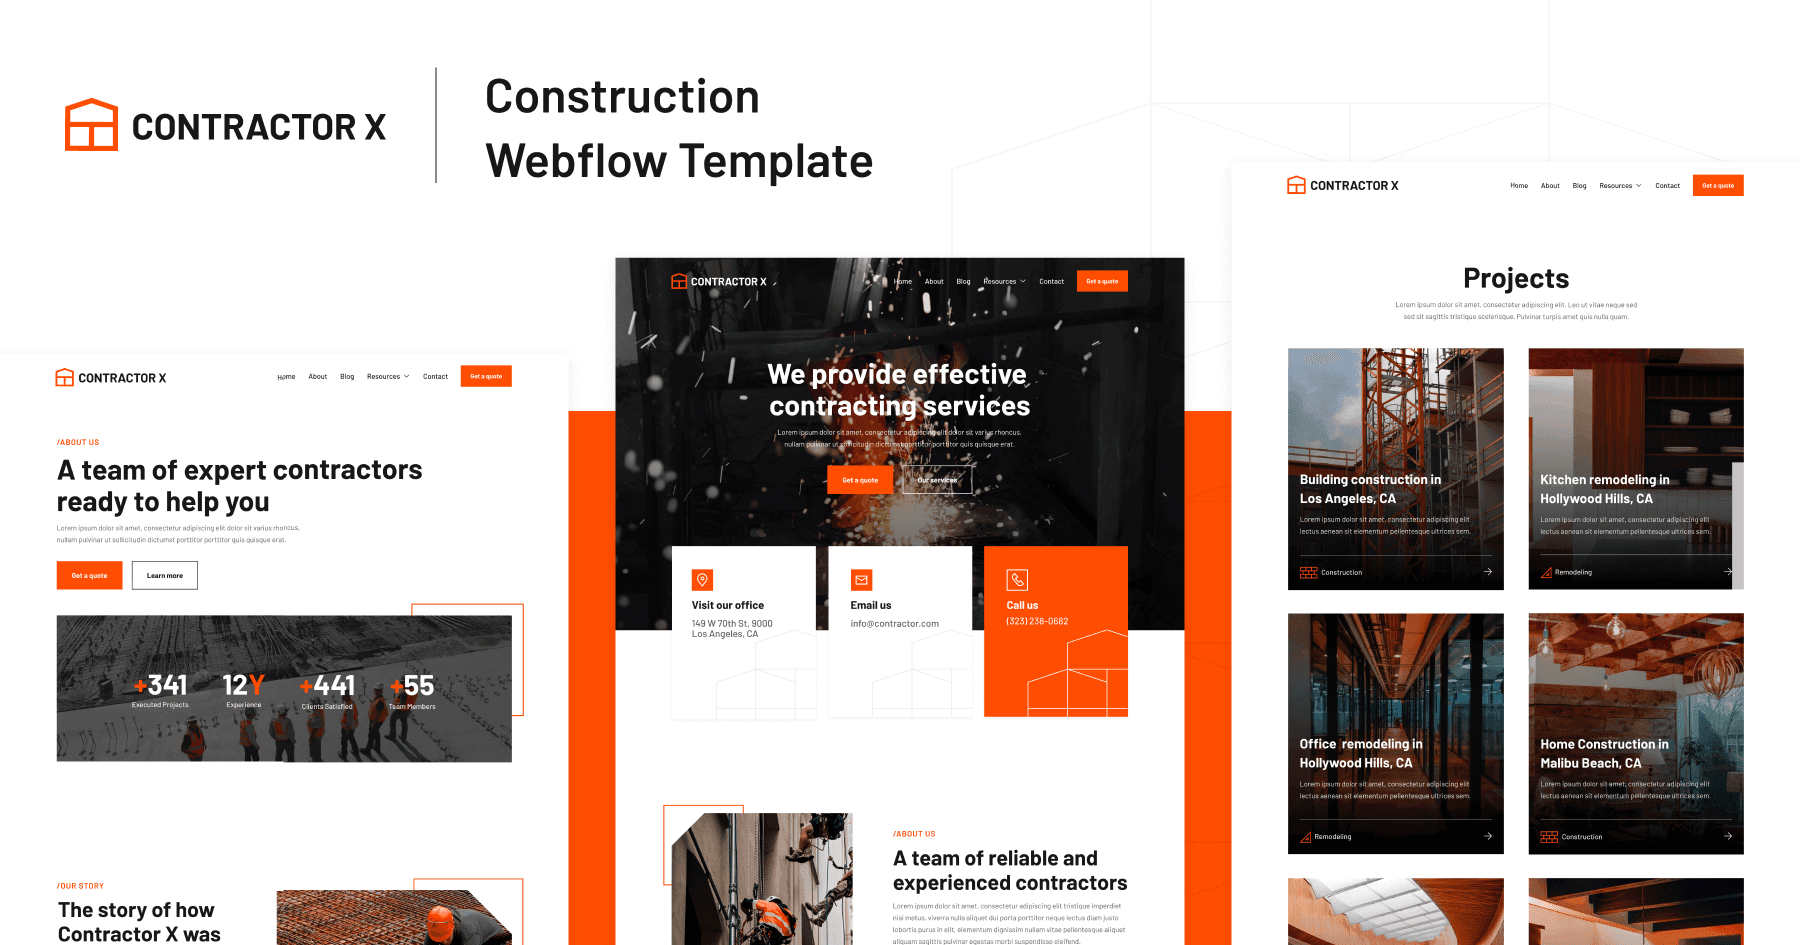 Product Services - Contractor X - Webflow Ecommerce website template image